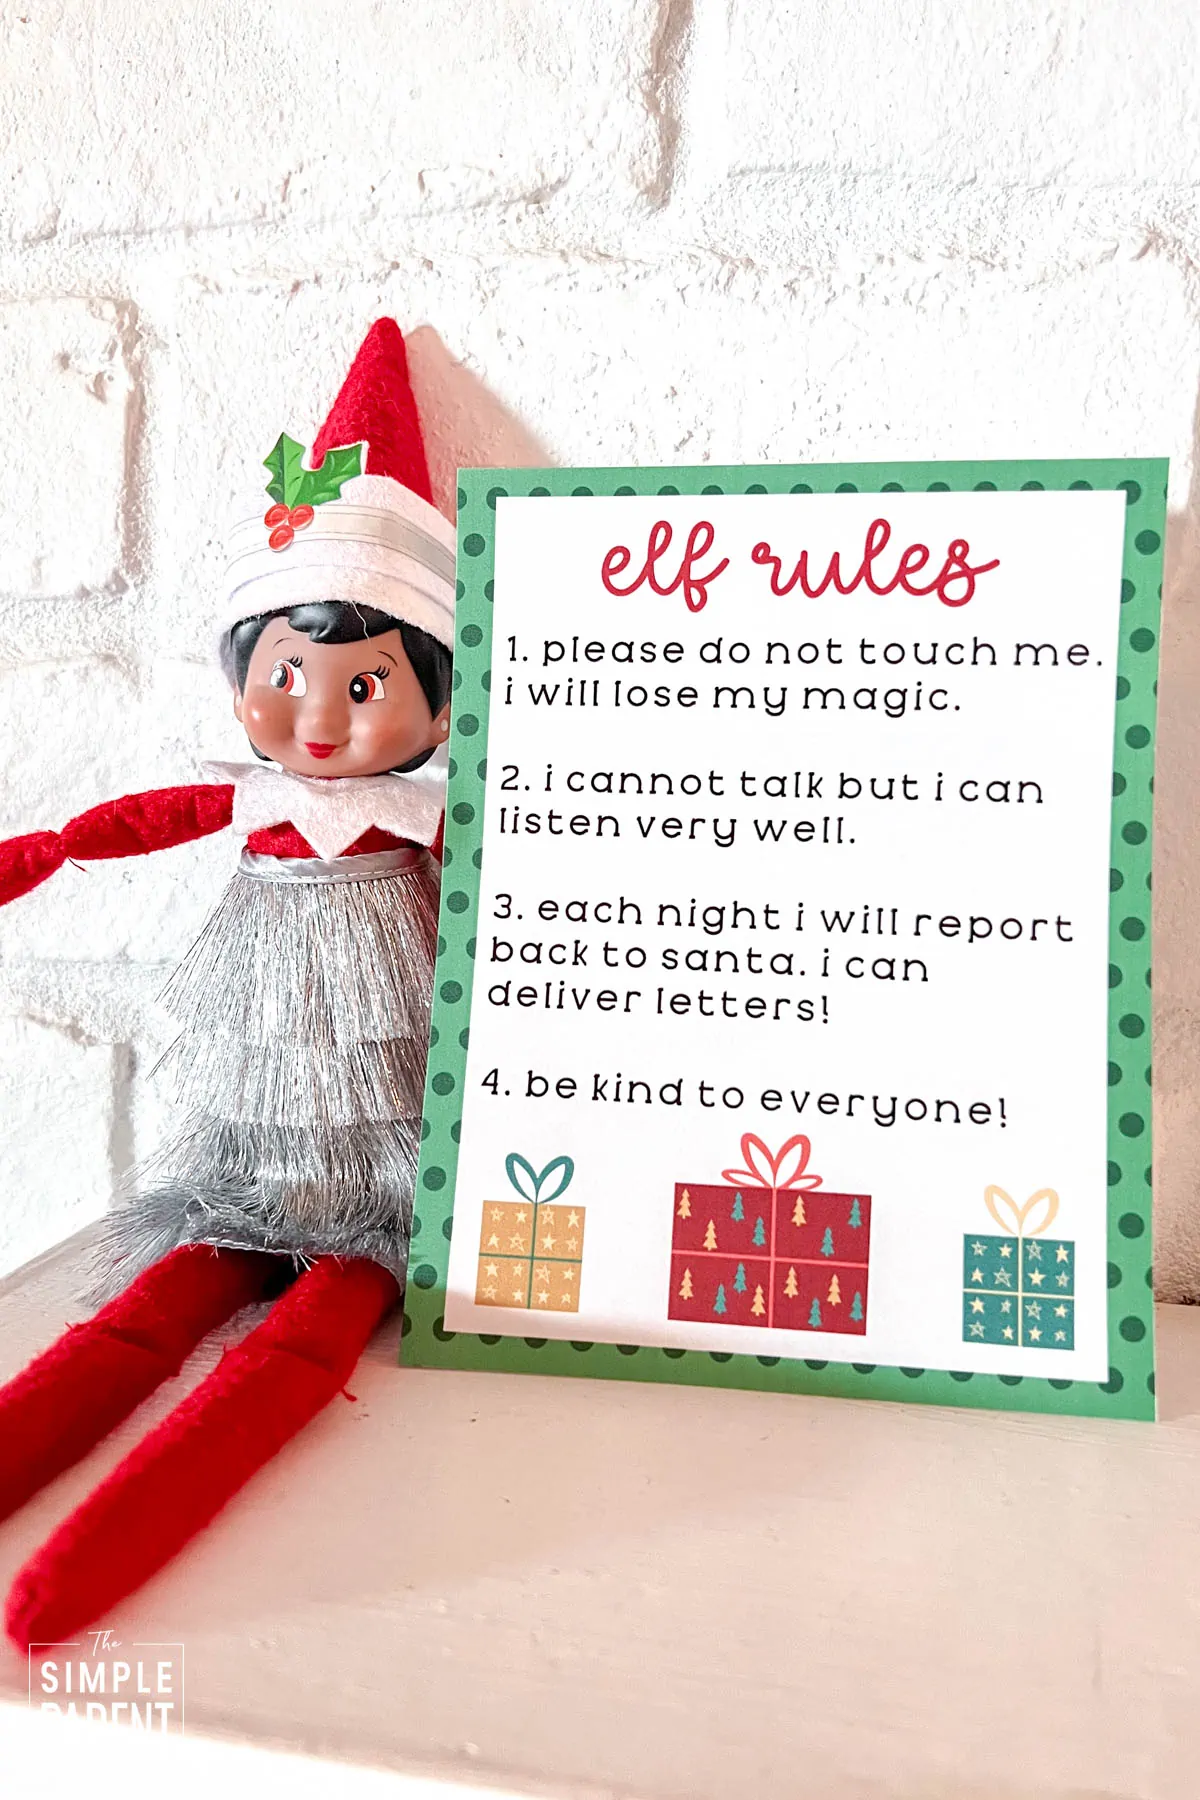 Elf sitting on mantle with Elf on the Shelf rules sheet